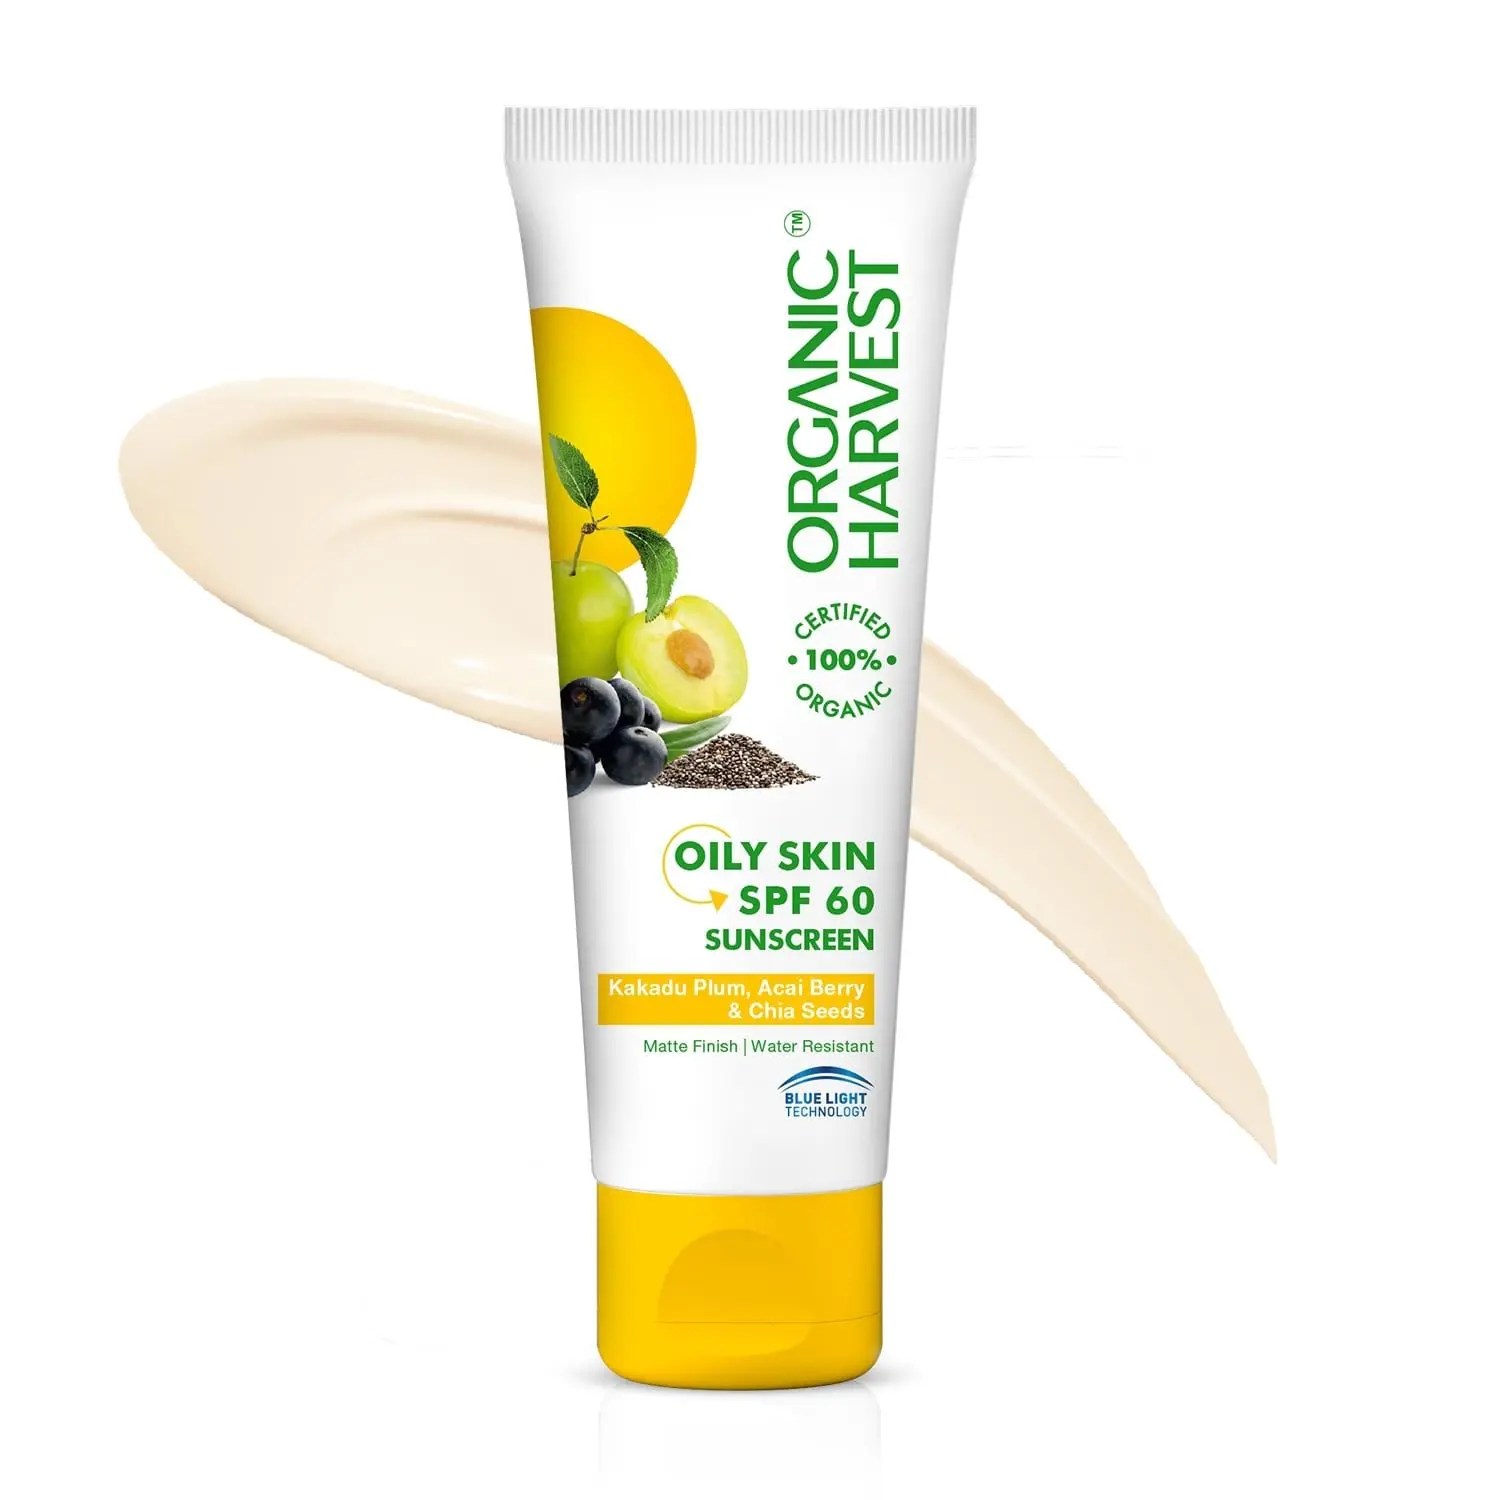 Organic Harvest Oily Skin SPF 60 Sunscreen For Men/Women With Certified Organic Ingredients